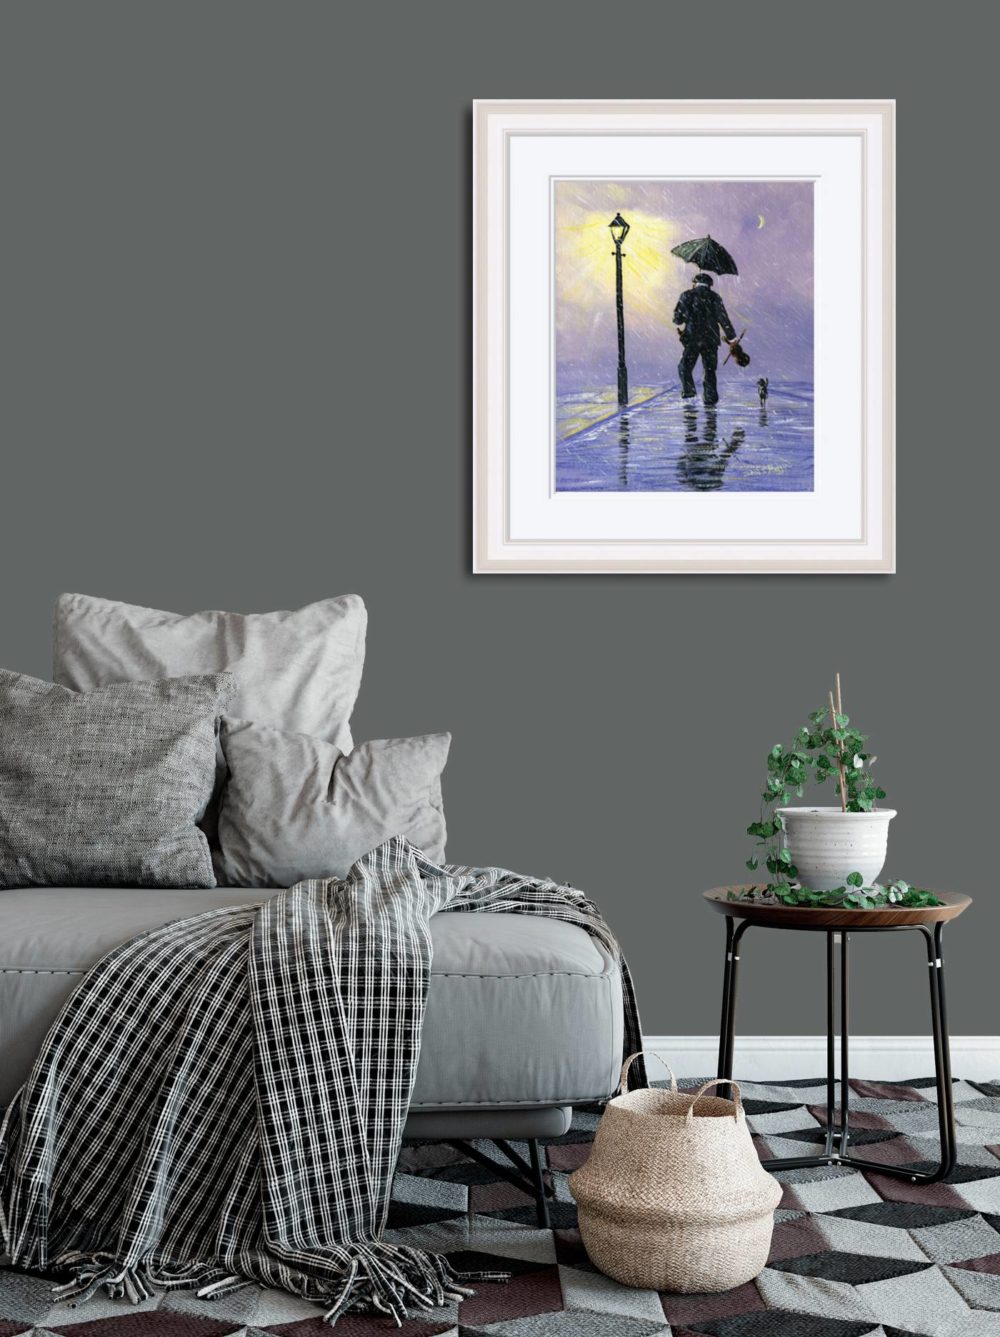 Raindrops Keep Falling Print (Large) In White Frame In Room